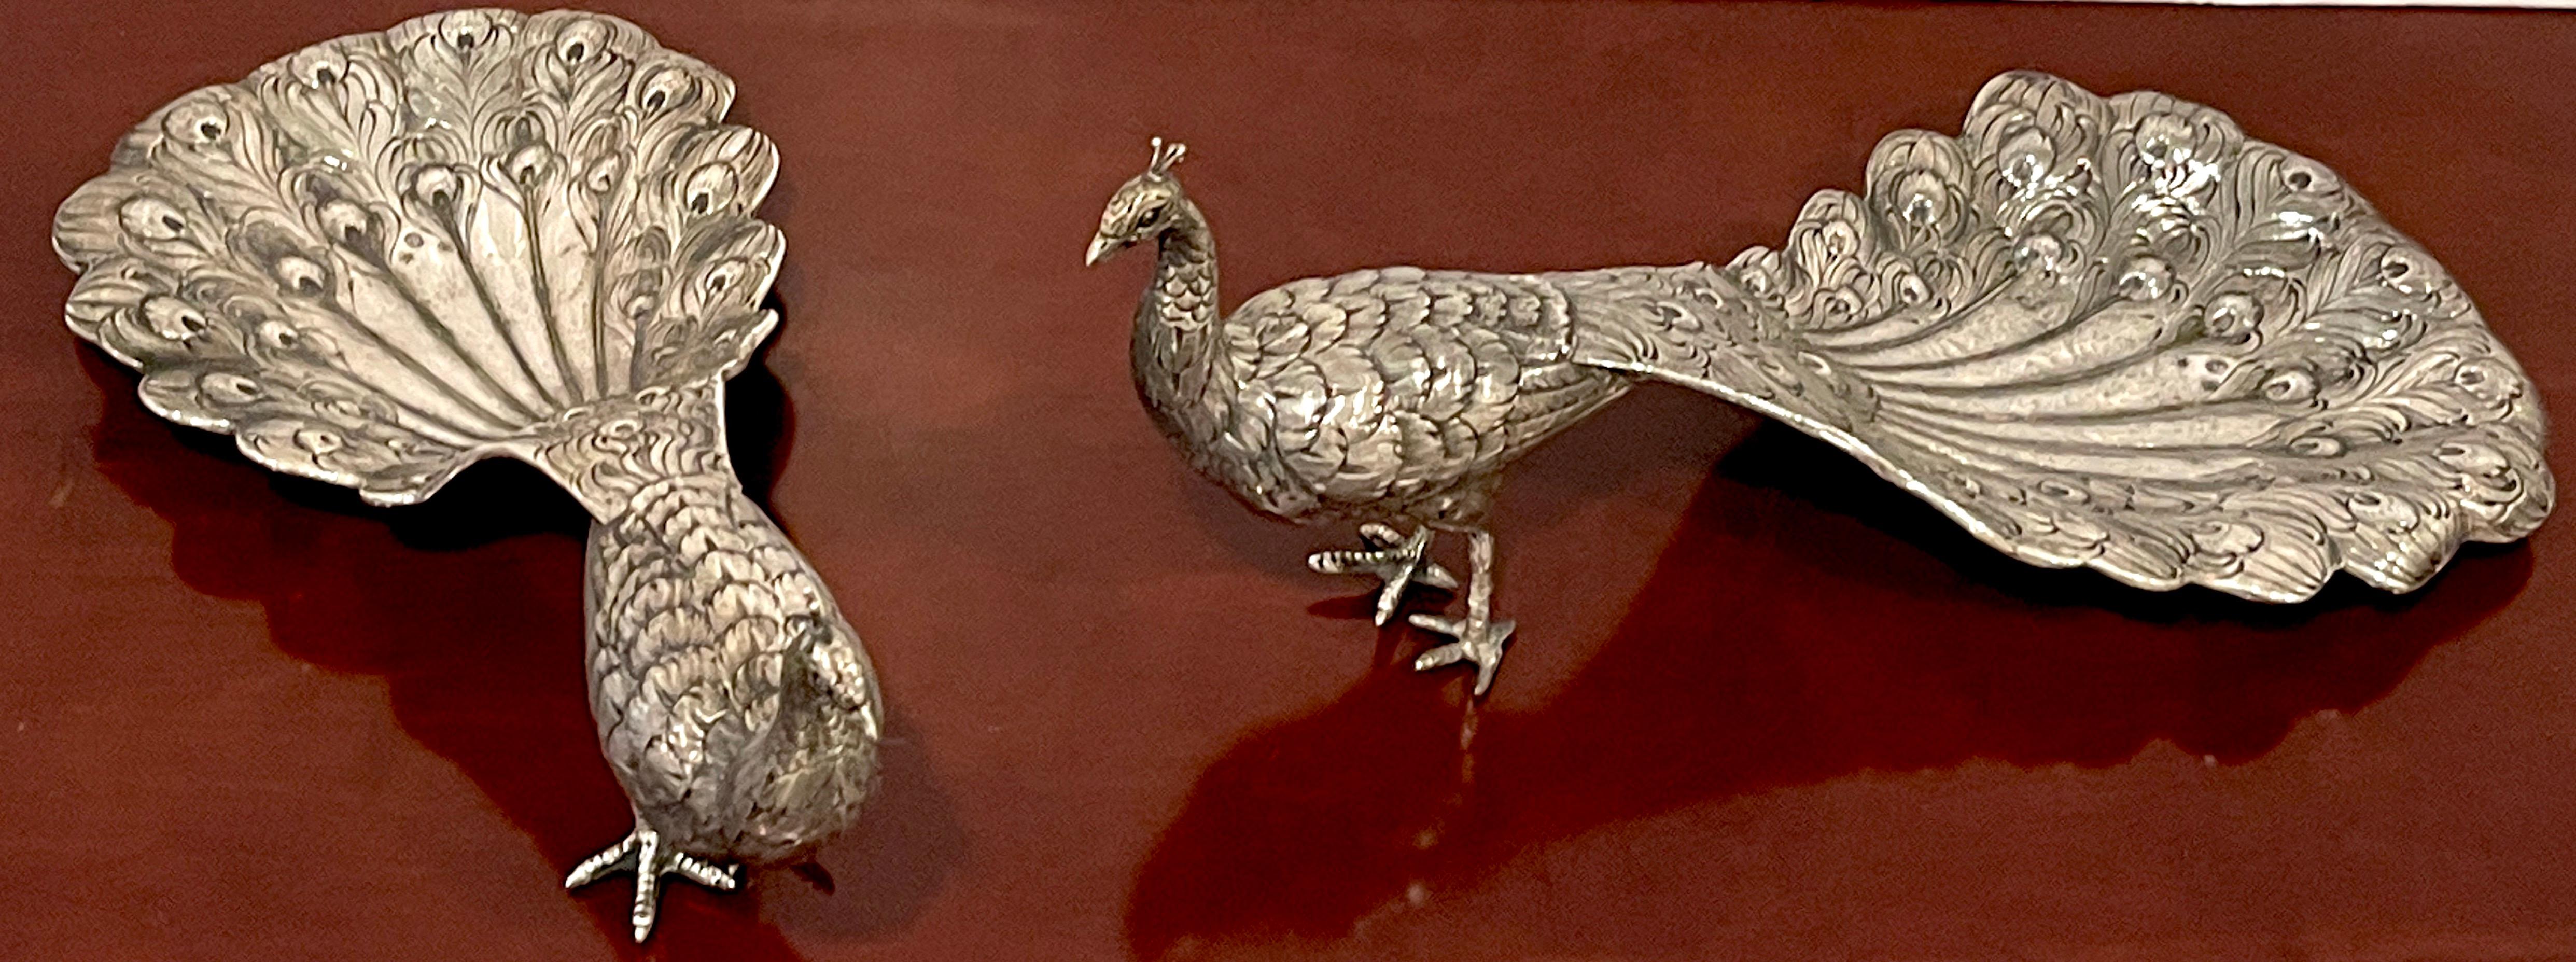 Pair of 19th Century Continental silver table figures of peacocks 
Germany, Circa 1880s
Each one realistically cast, modeled and chased figures/models of standing peacocks. These whimsical sculptures can be used as table ornaments or as serving